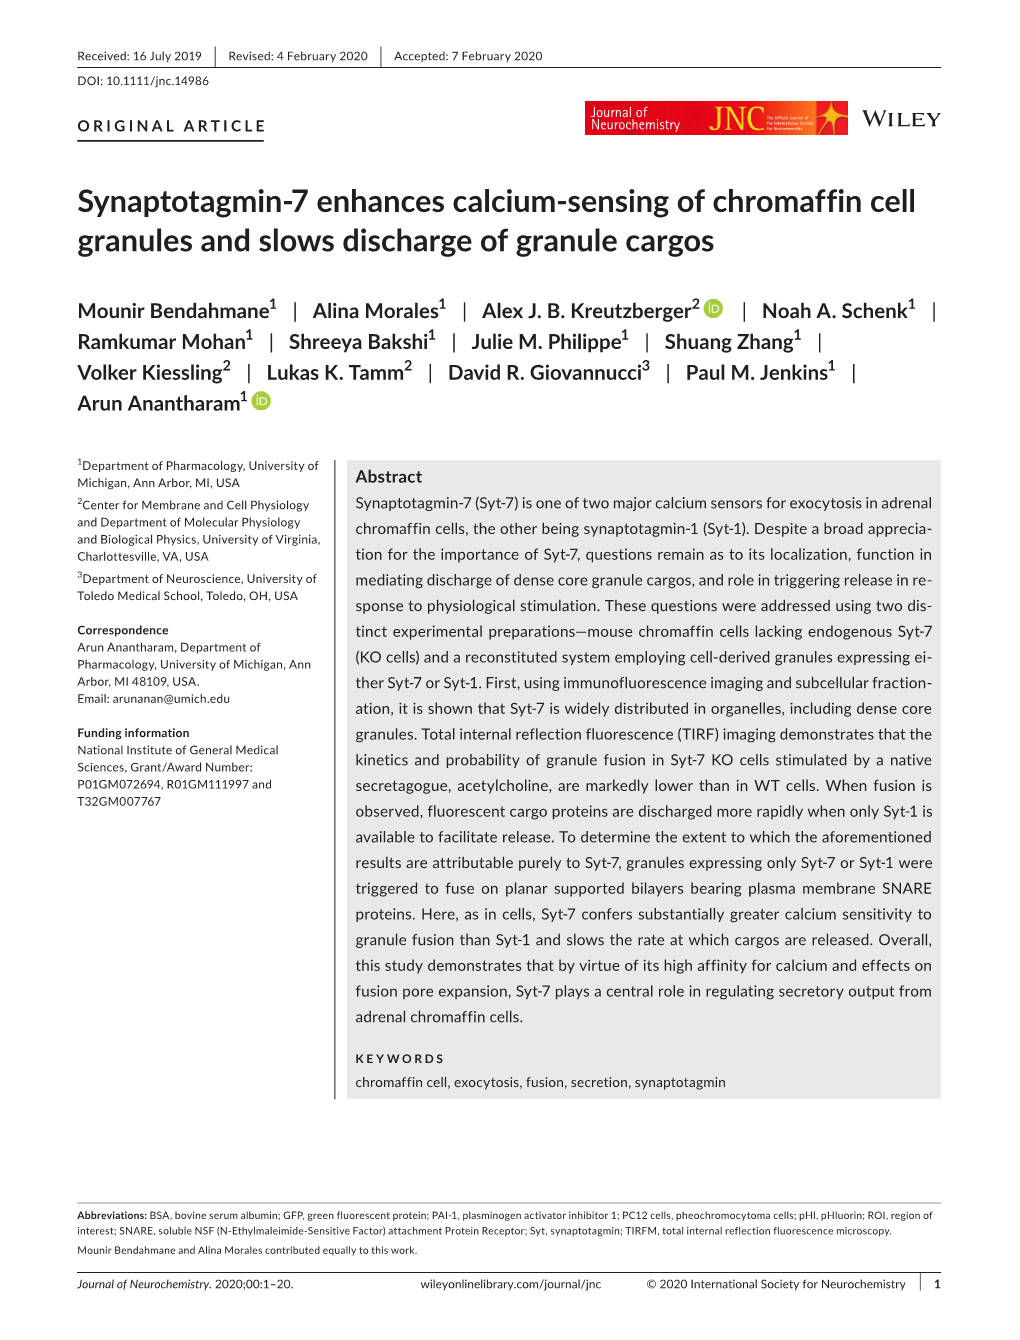 Synaptotagmin-7 Enhances Calcium-Sensing of Chromaffin Cell Granules and Slows Discharge of Granule Cargos